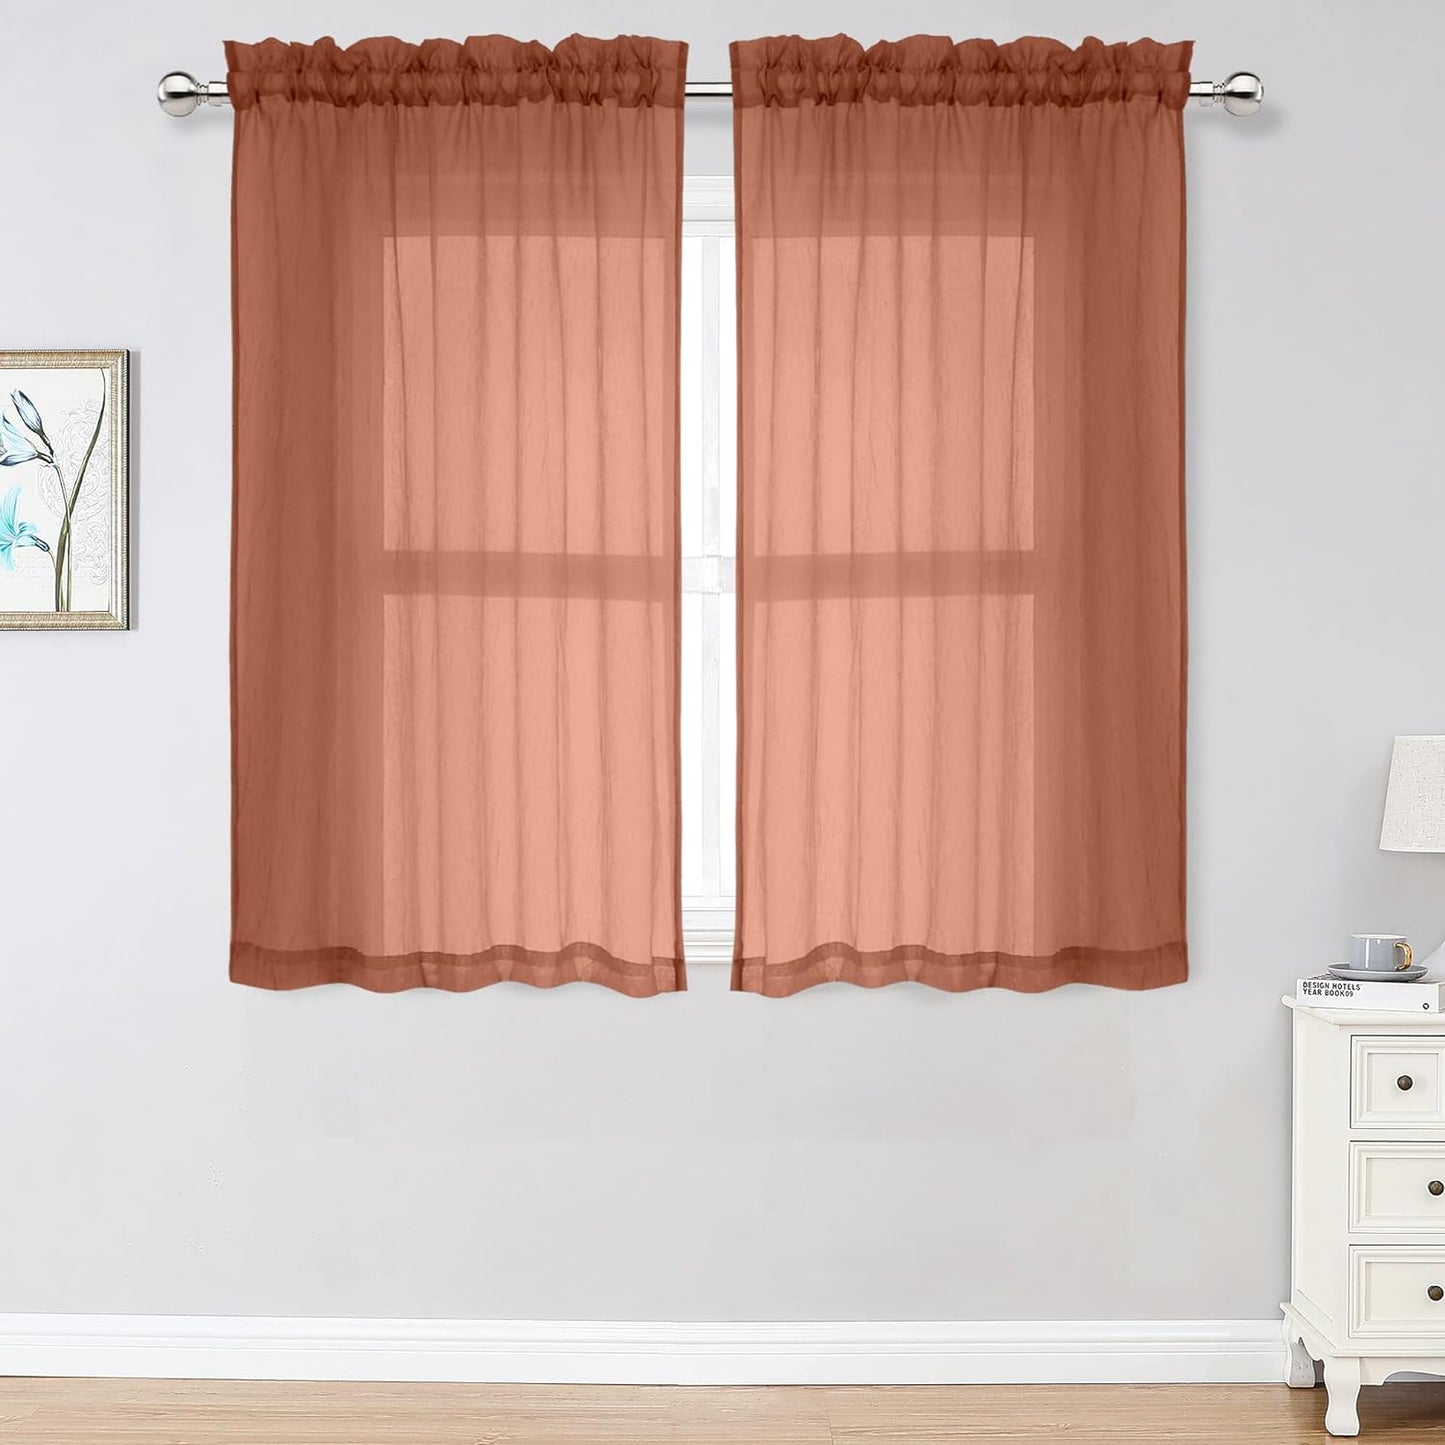 Chyhomenyc Crushed White Sheer Valances for Window 14 Inch Length 2 PCS, Crinkle Voile Short Kitchen Curtains with Dual Rod Pockets，Gauzy Bedroom Curtain Valance，Each 42Wx14L Inches  Chyhomenyc Rust 40 W X 54 L 